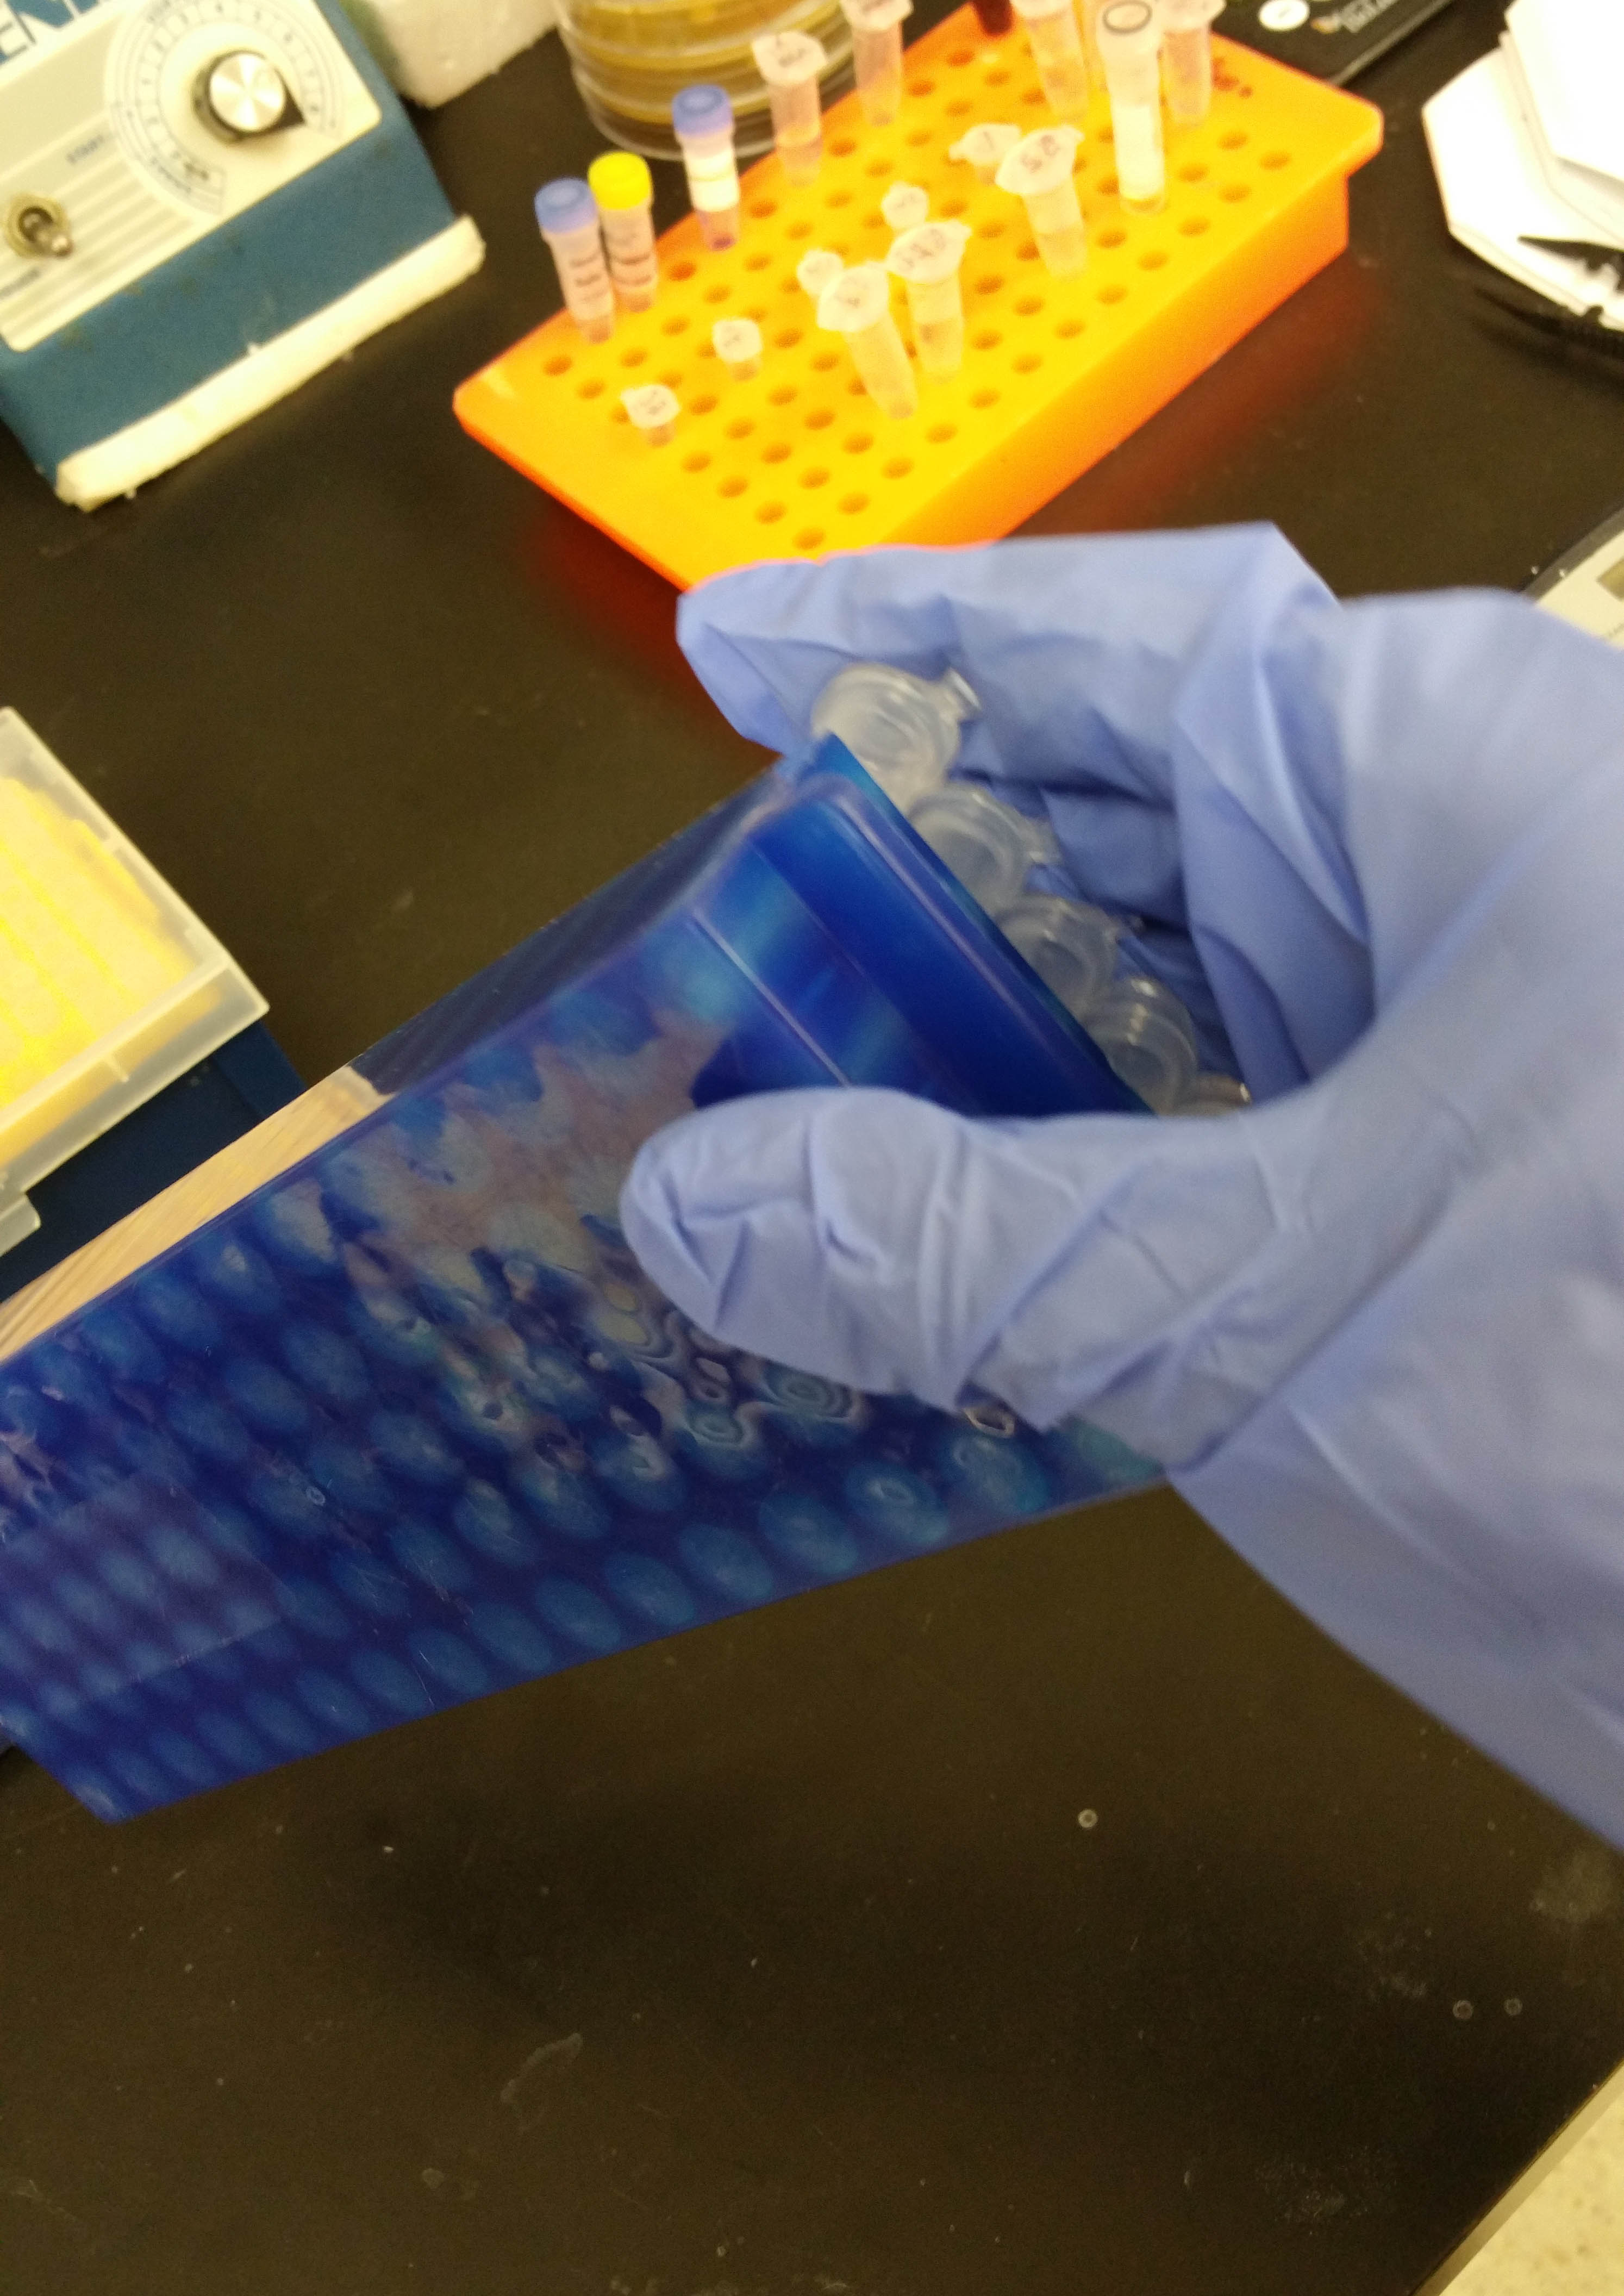 25 Real Lab Hacks from Researchers Like You - Invert multiple tubes at once using your tube rack